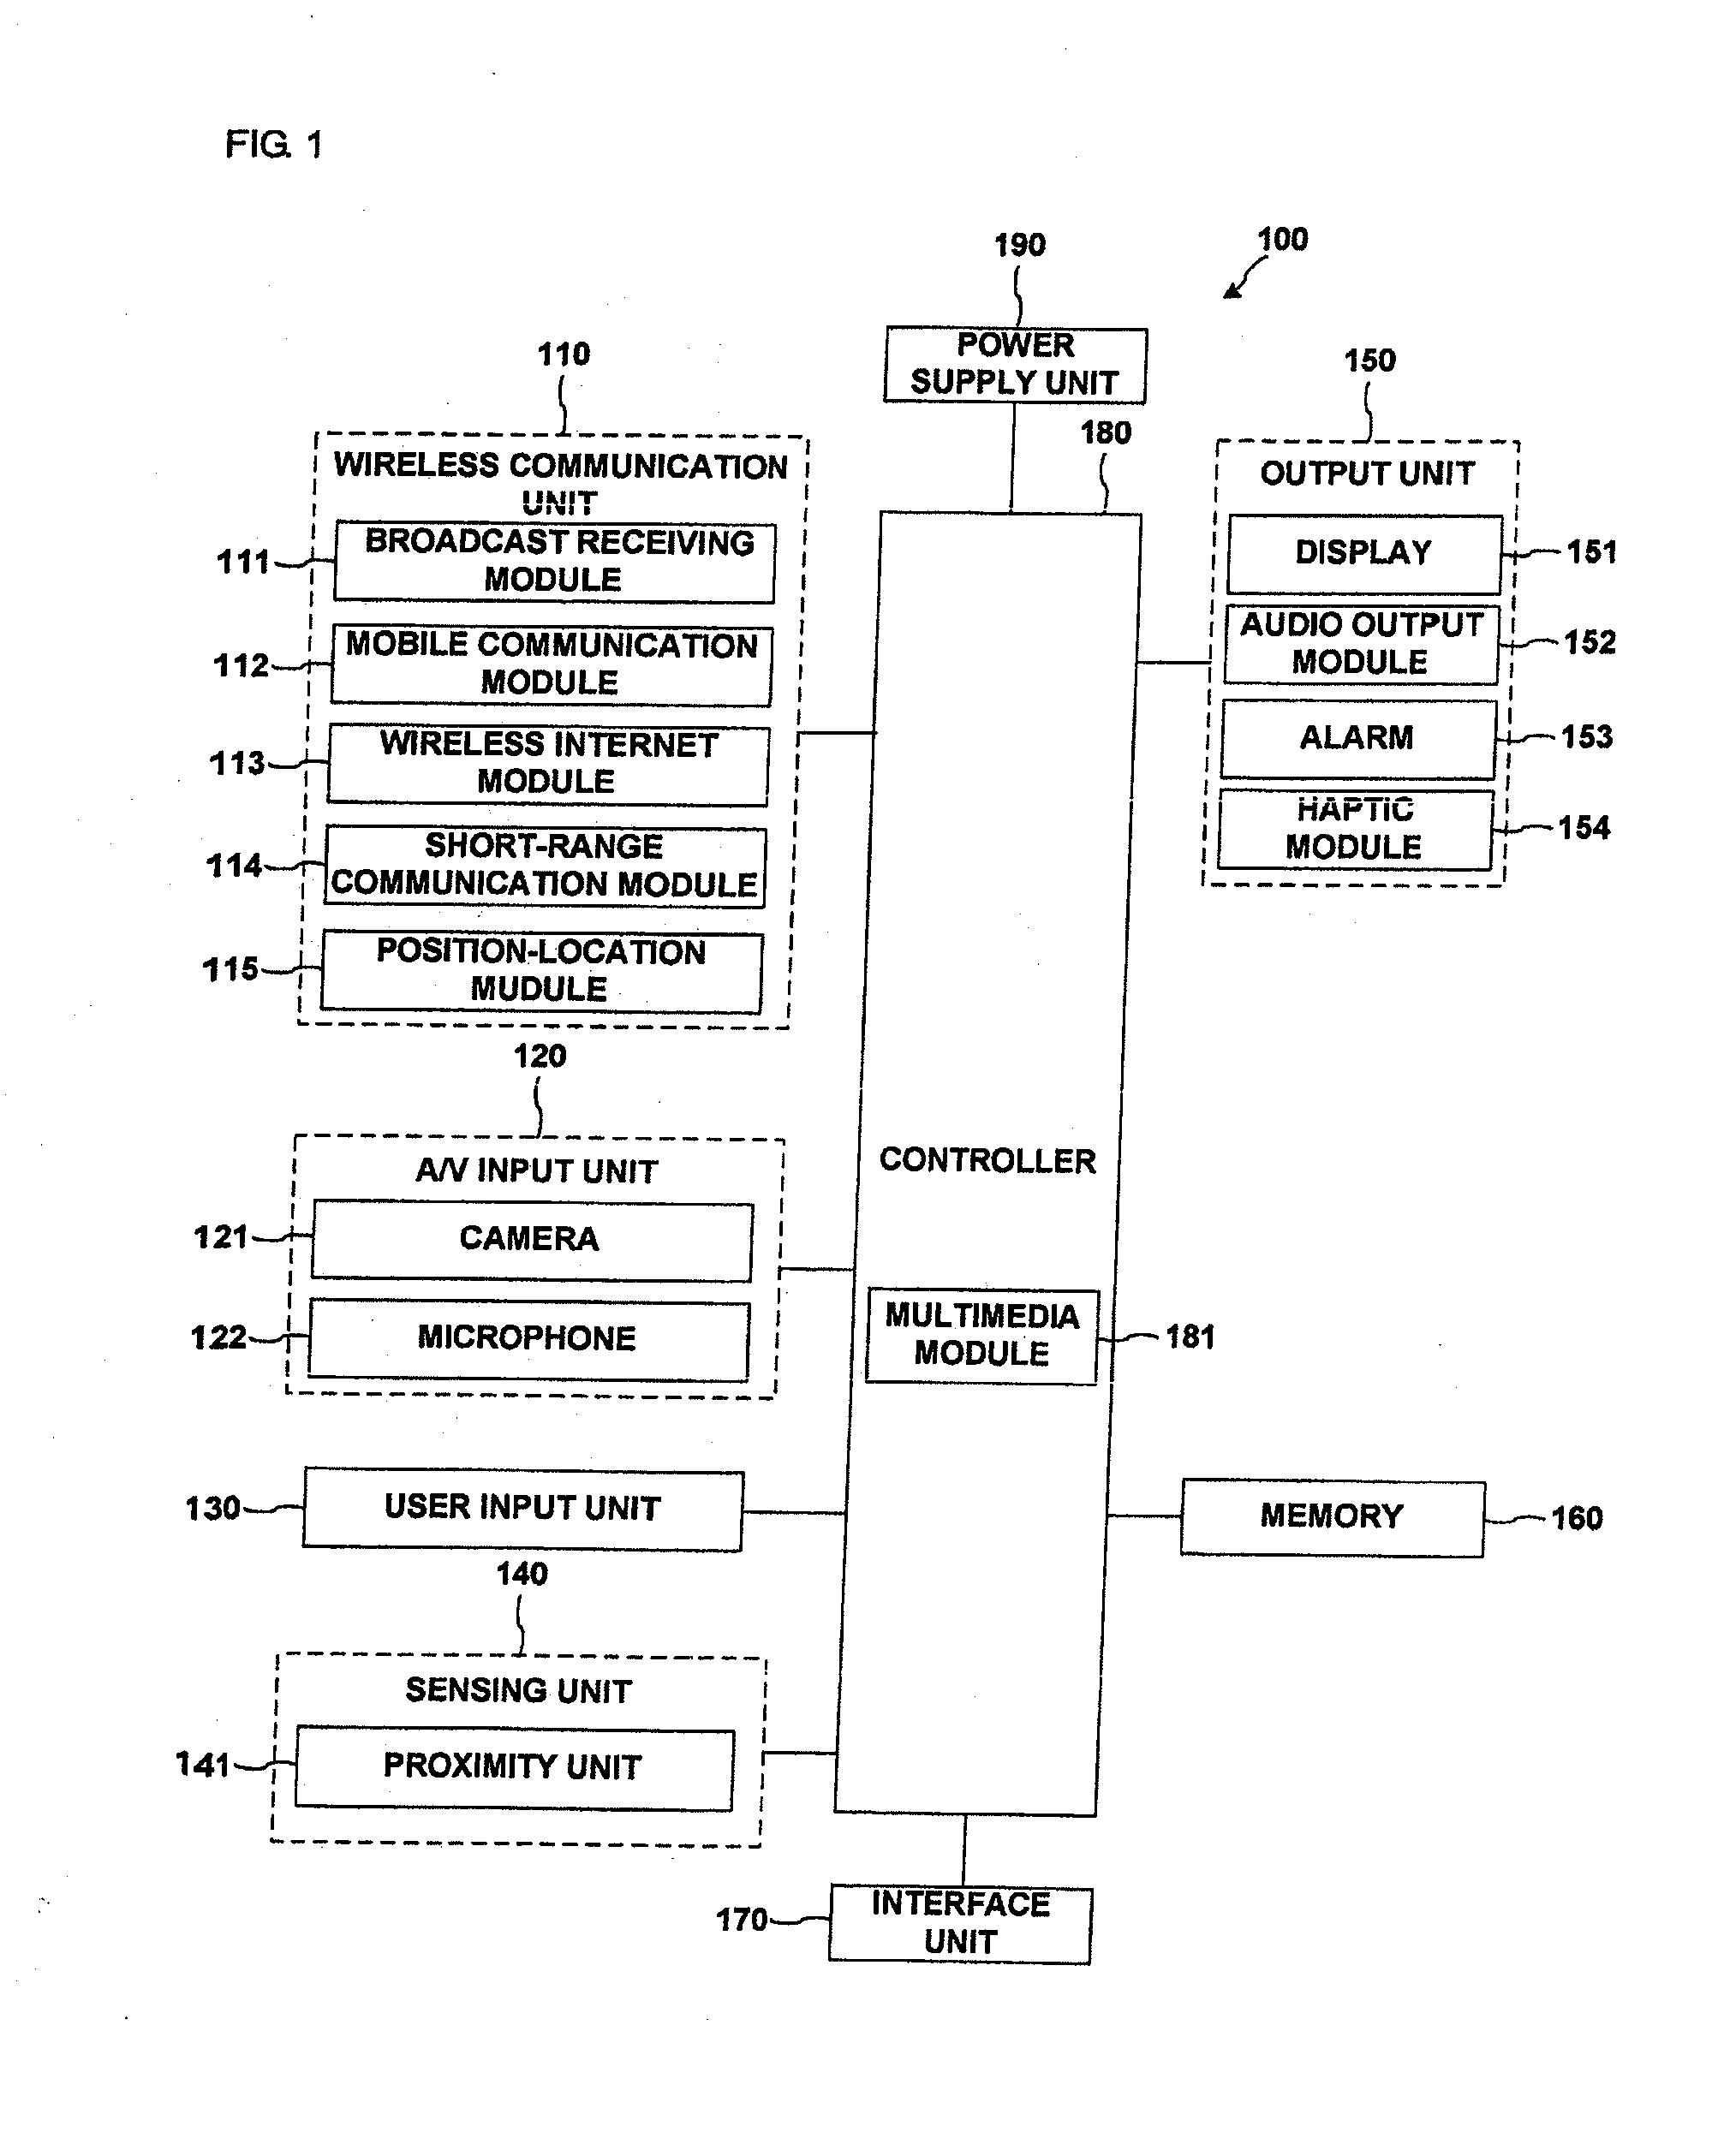 Method for editing three-dimensional image and mobile terminal using the same